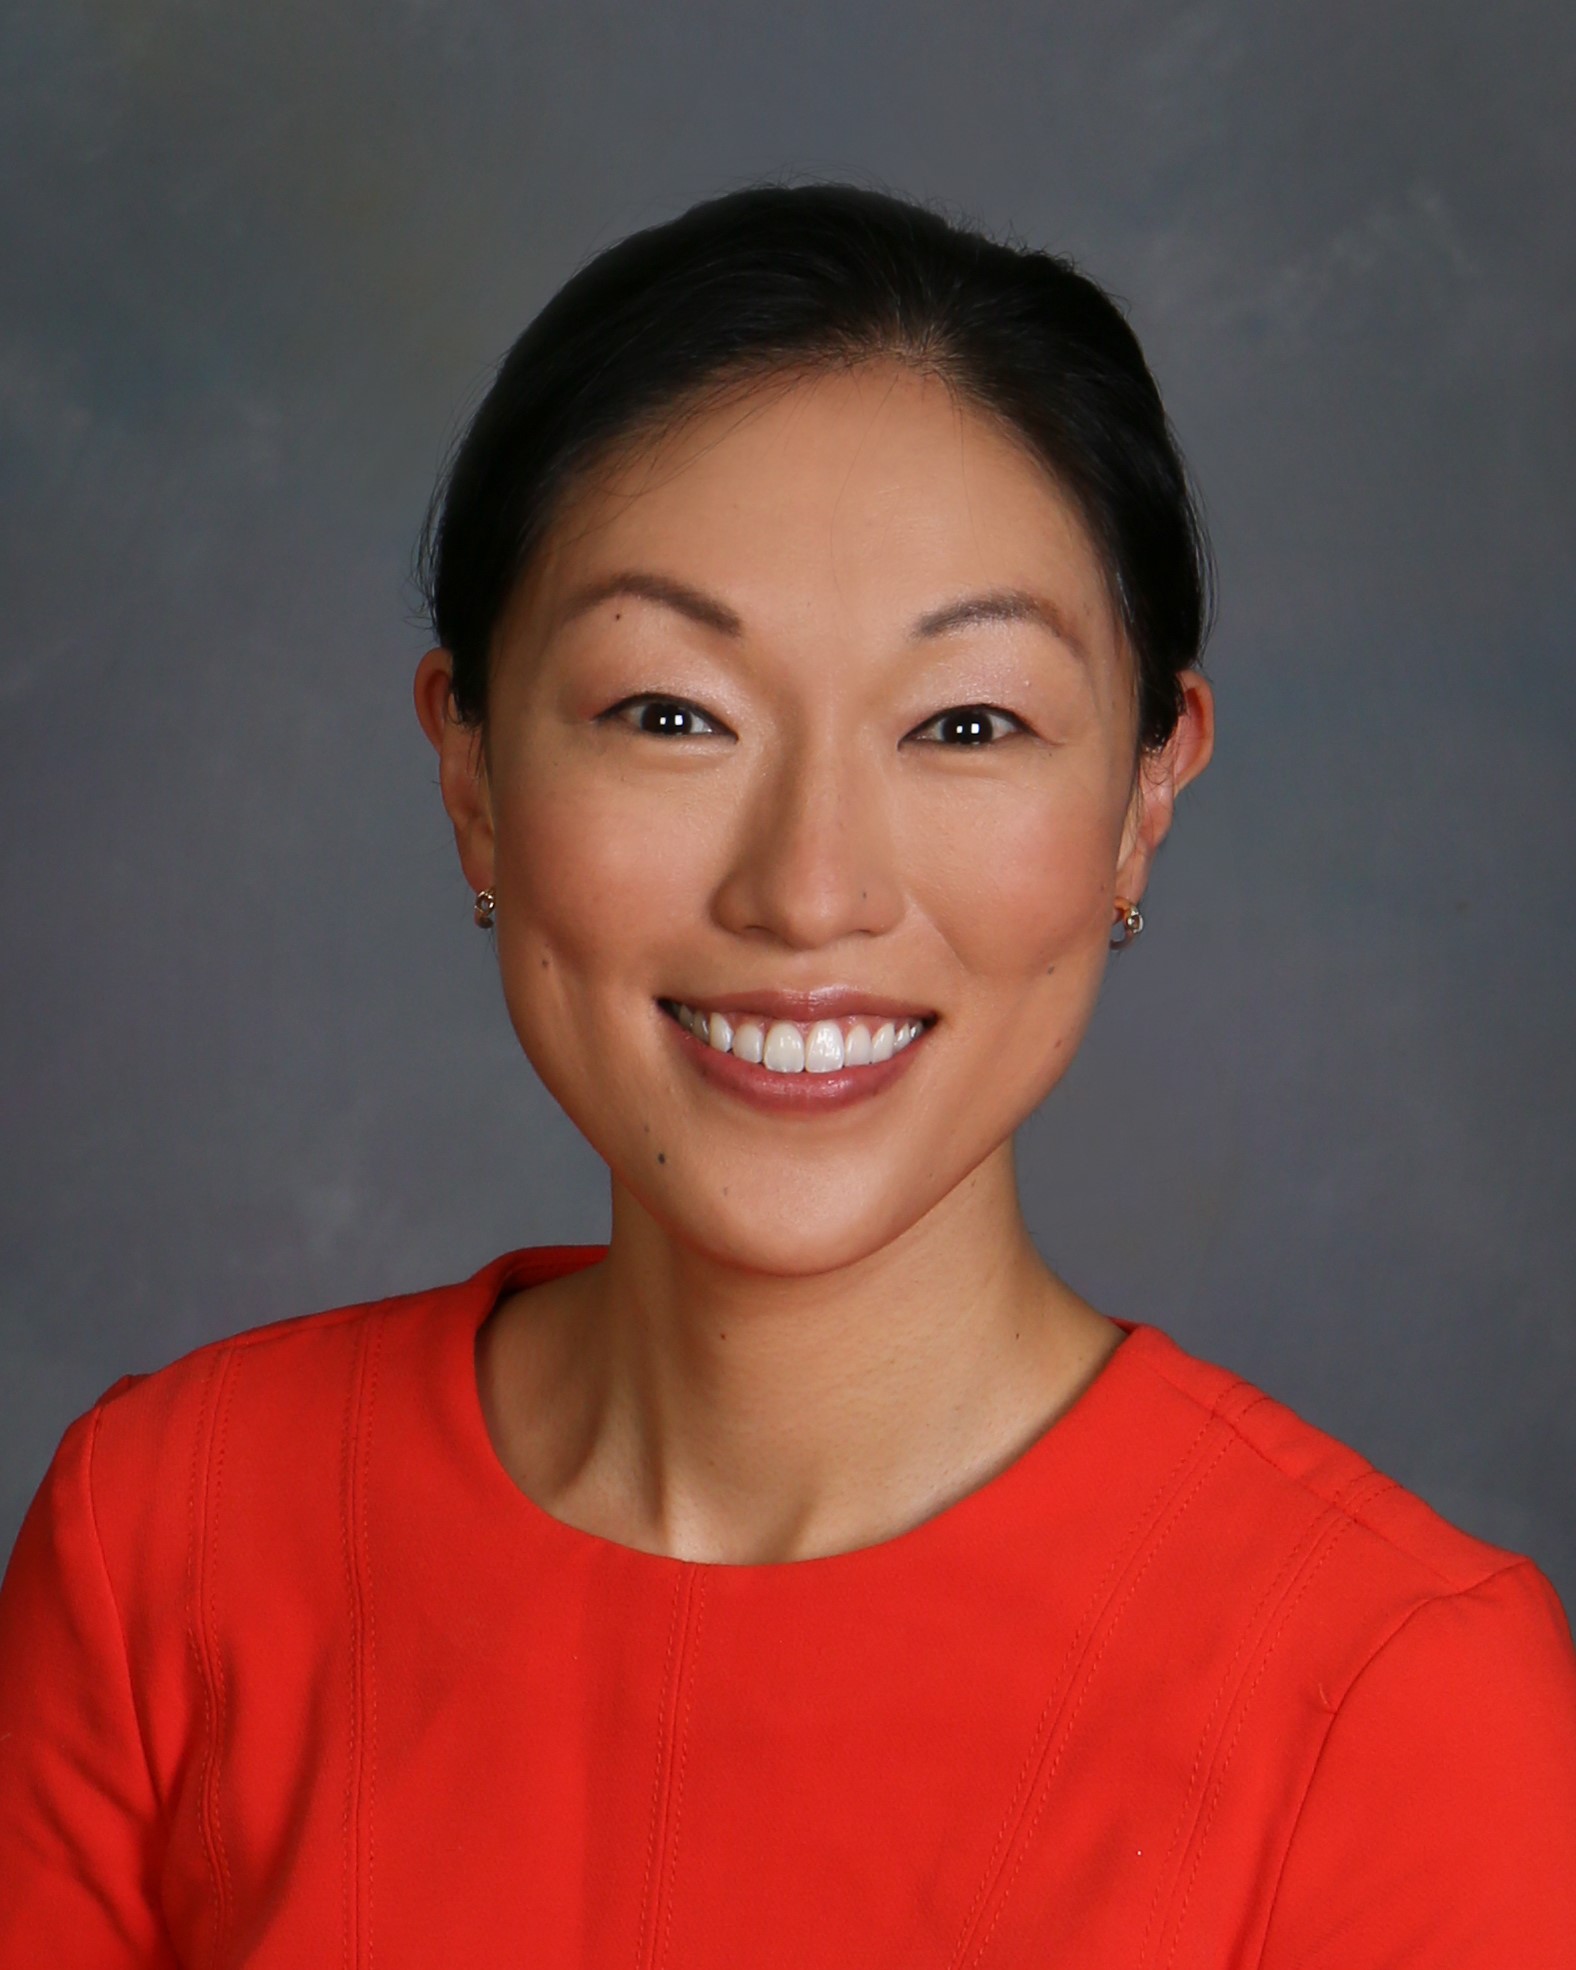 Meet The Provider – Dr. Jessica Lee